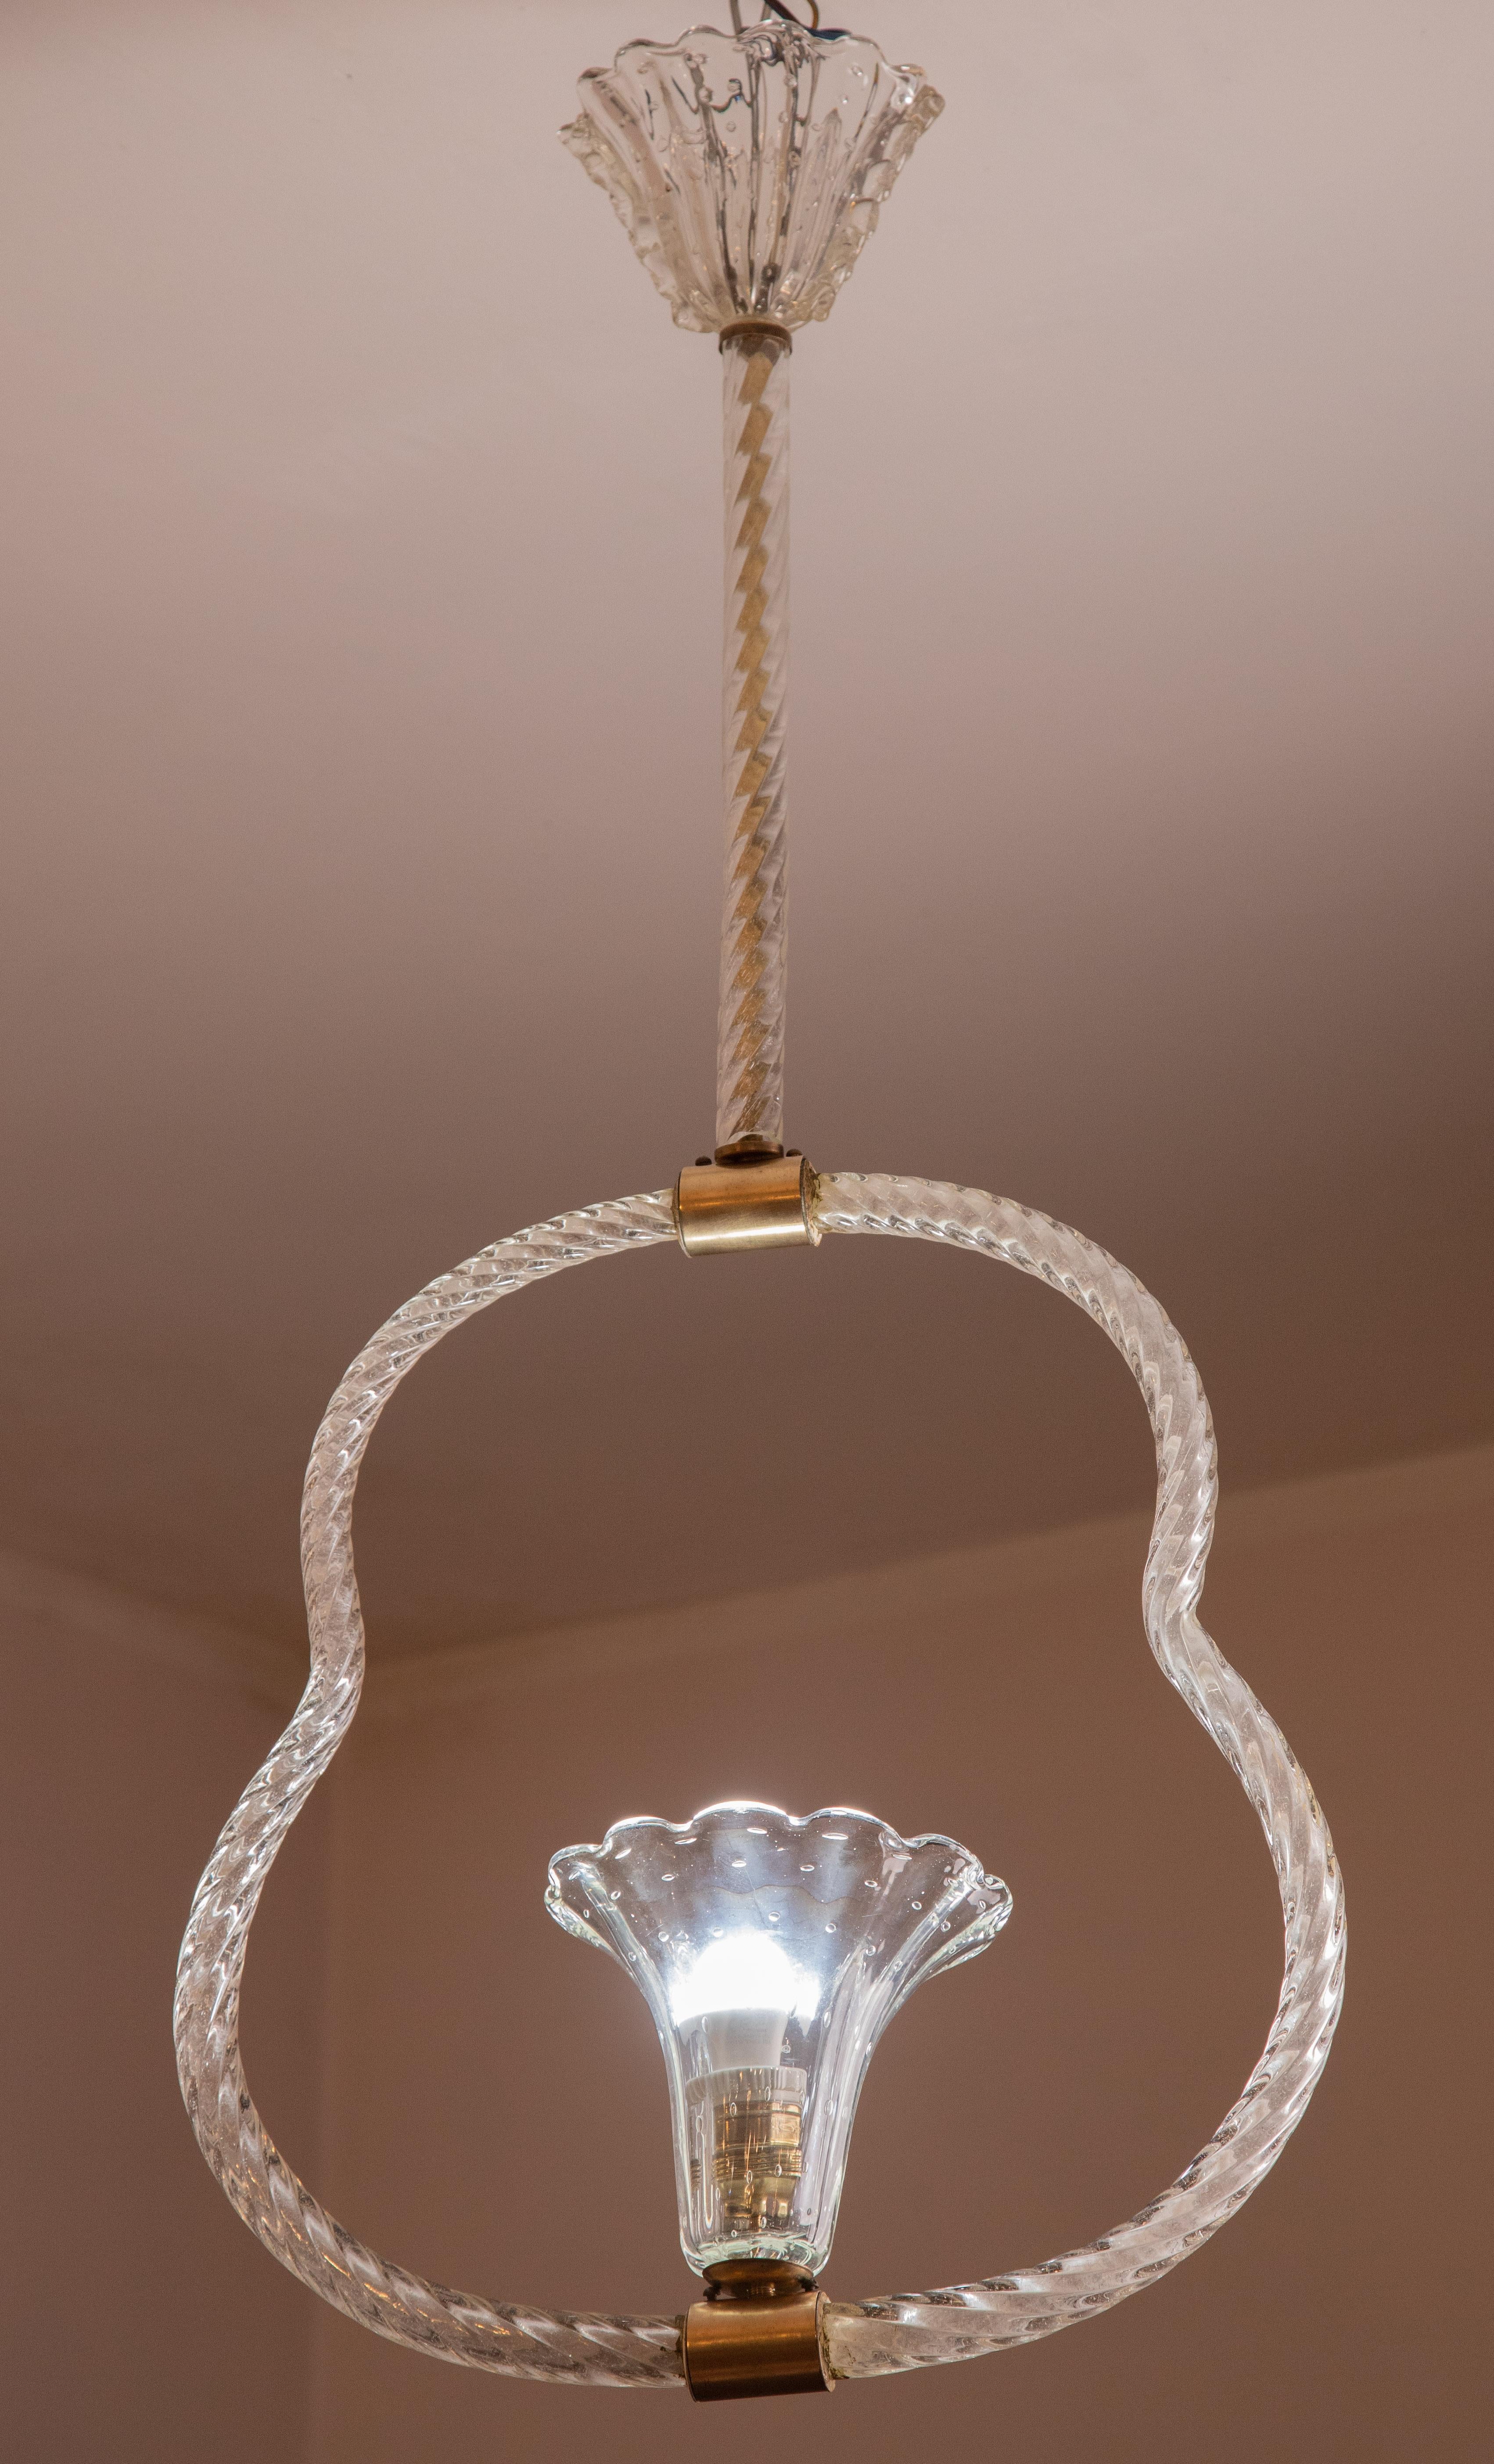 Splendid Murano chandelier made by the Barovier e Toso glassworks in the 1950s, rare 